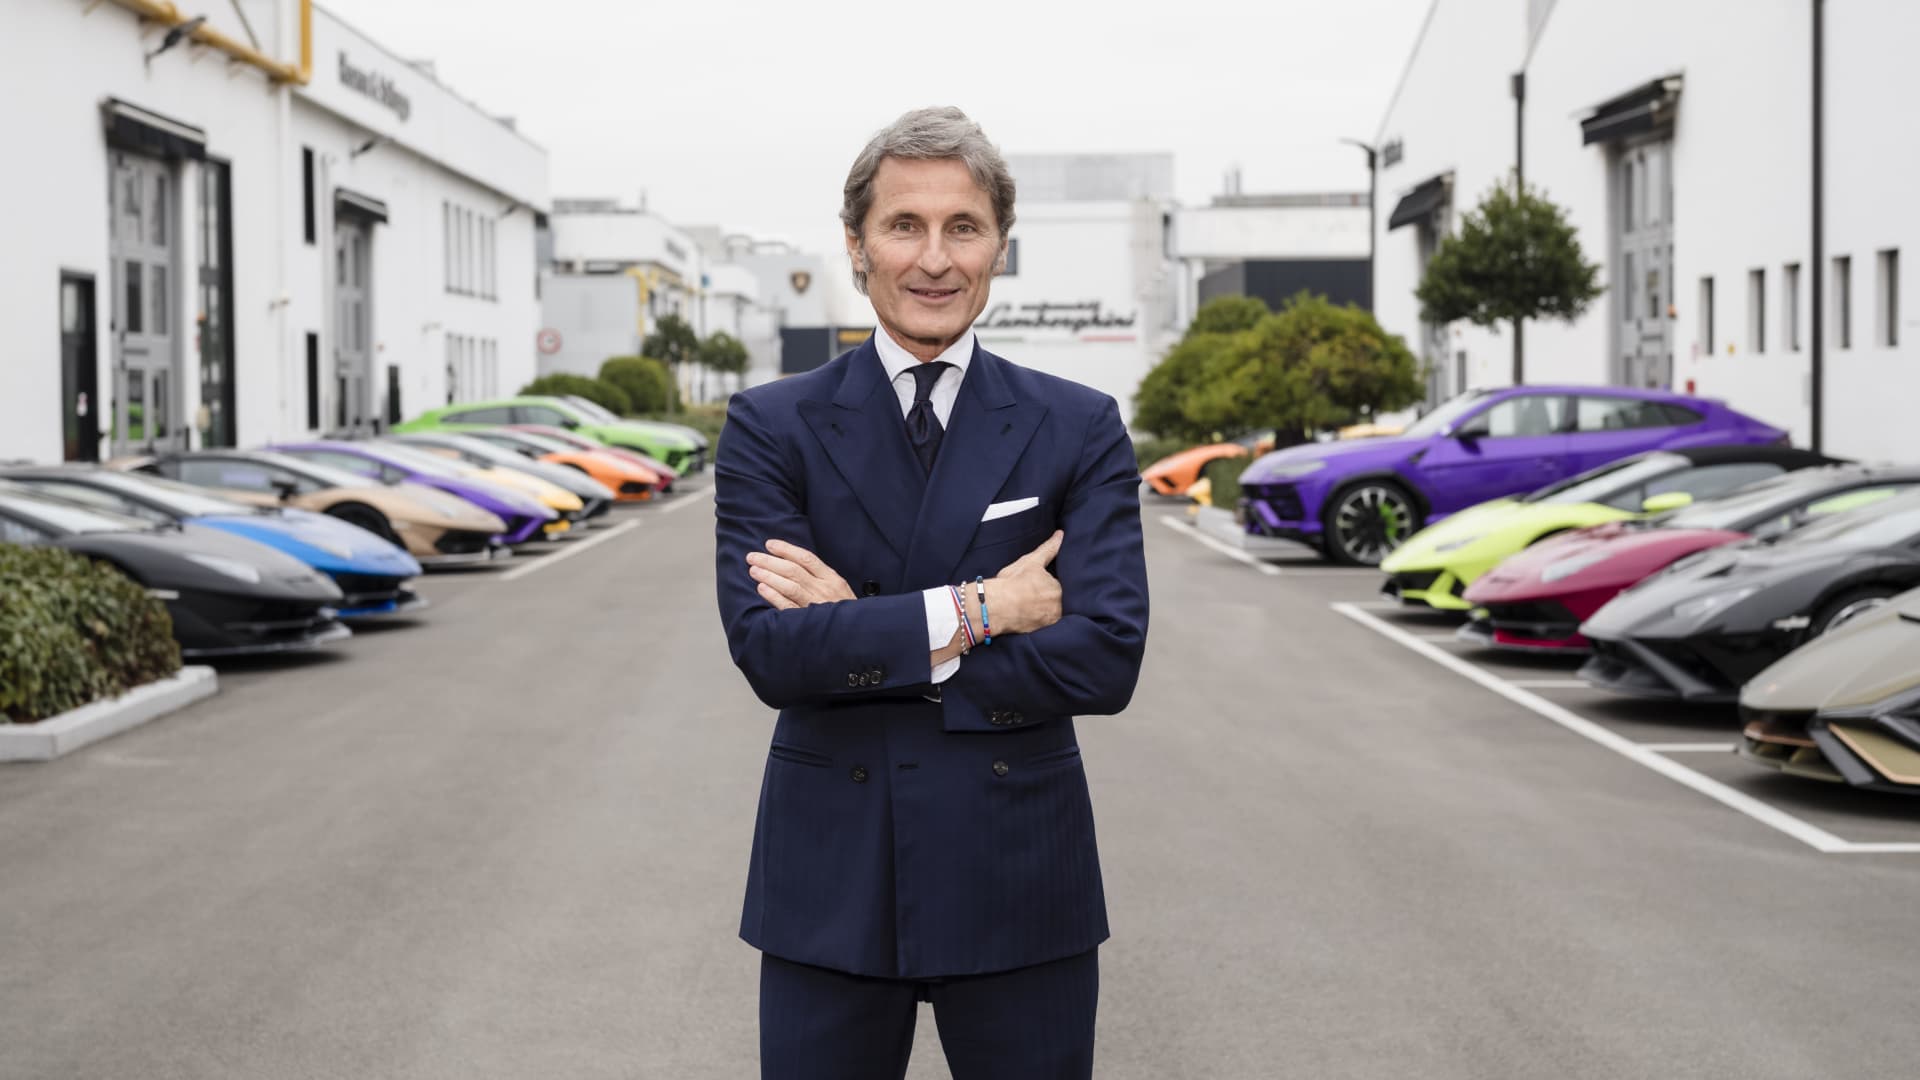 Lamborghini customers waiting more than 12 months for a car, CEO says